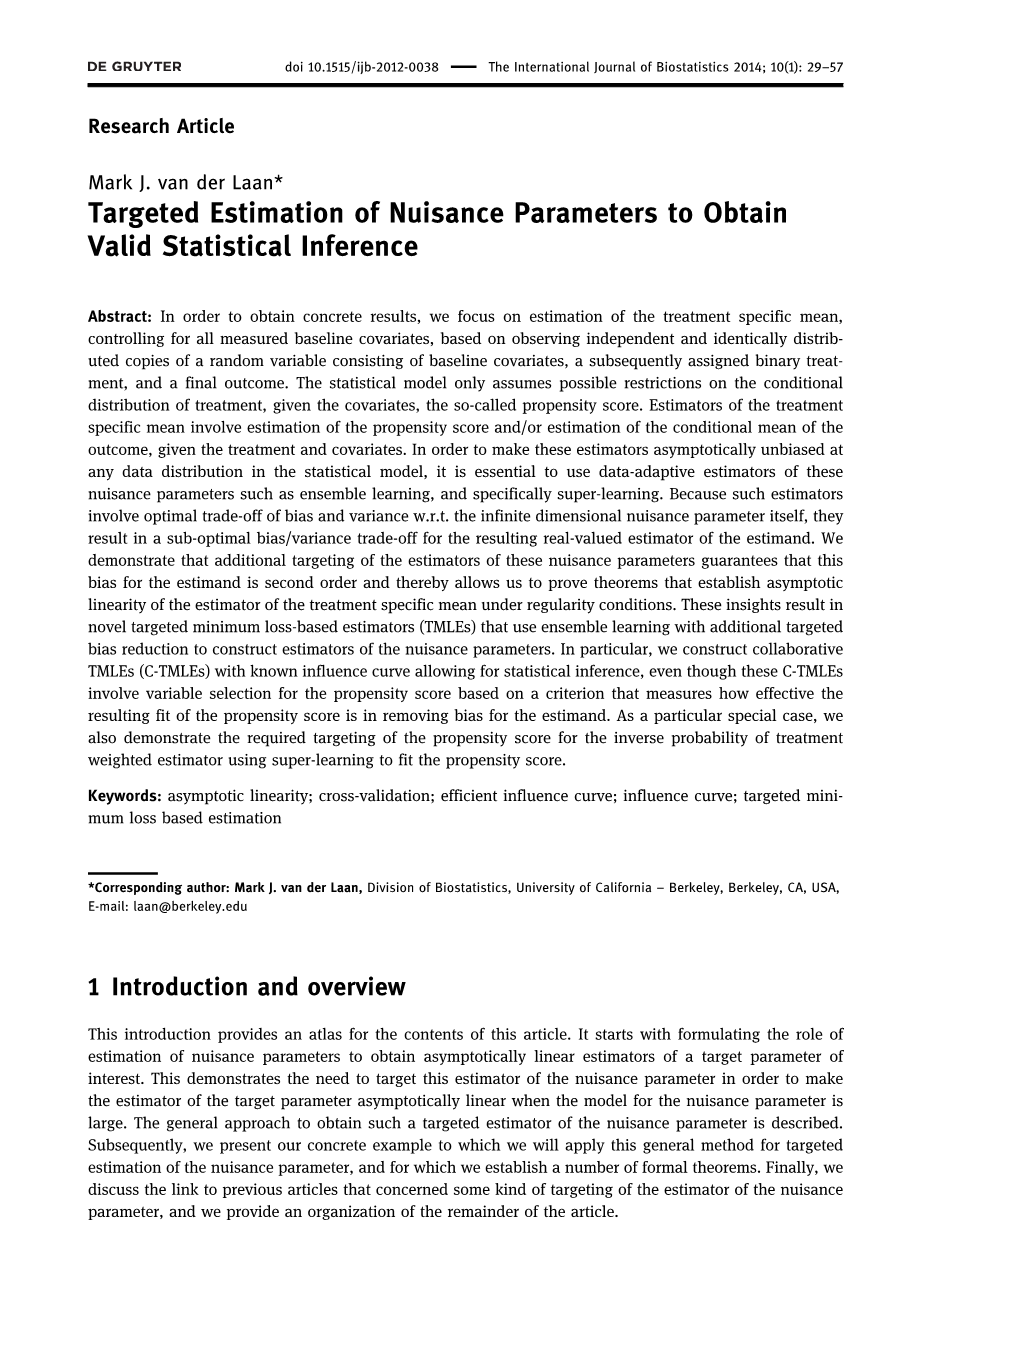 Targeted Estimation of Nuisance Parameters to Obtain Valid Statistical Inference